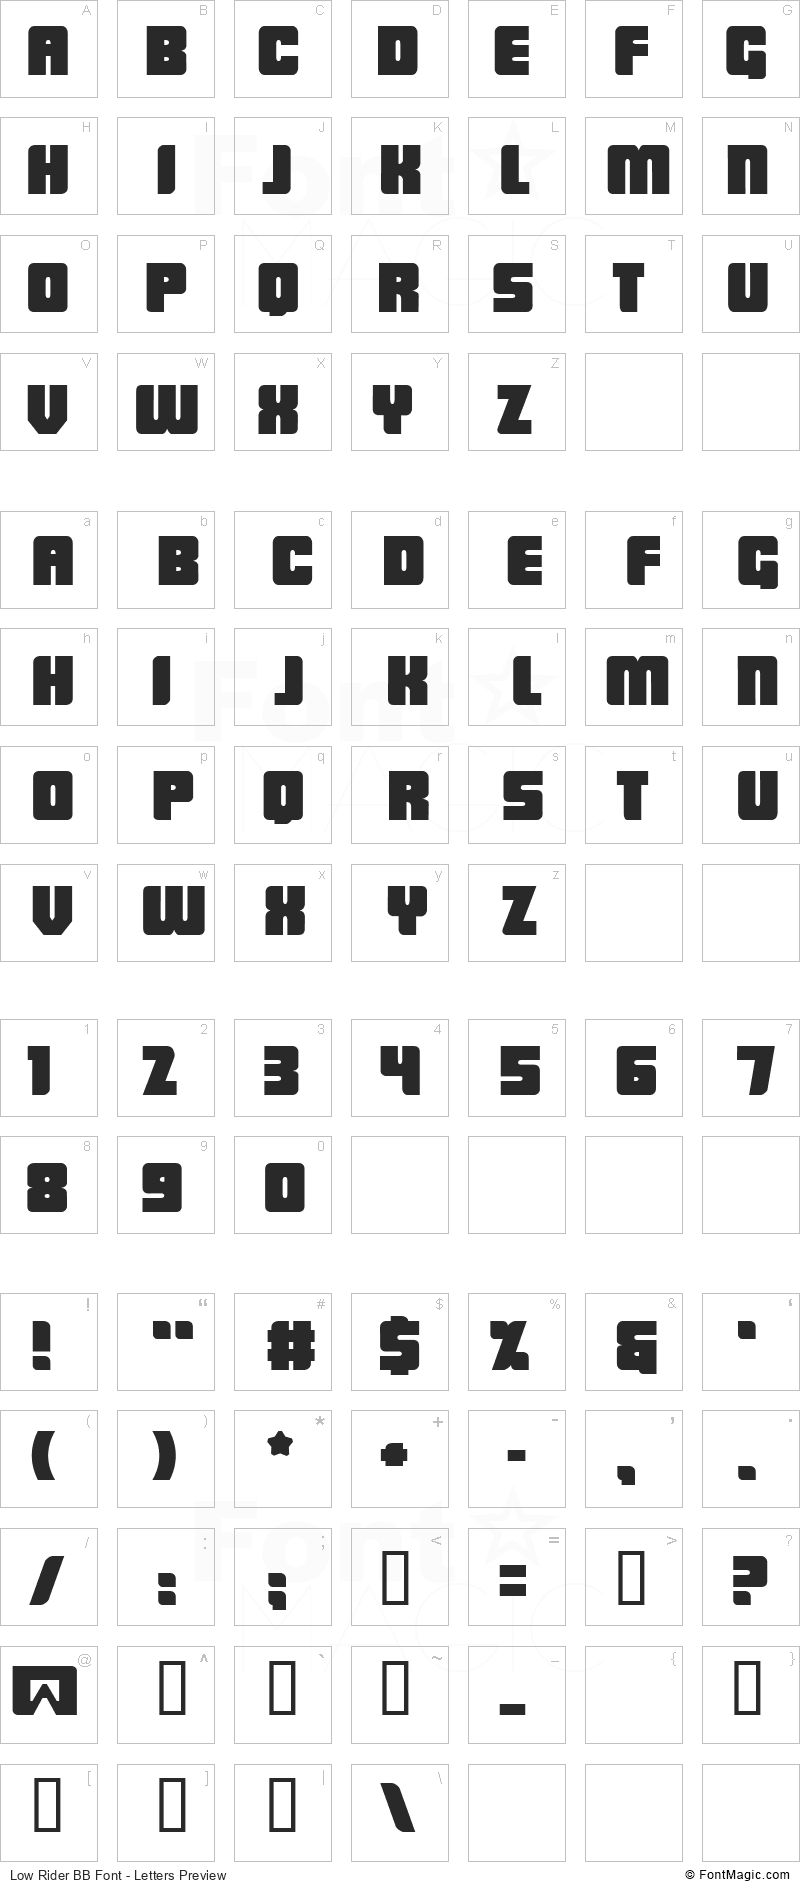 Low Rider BB Font - All Latters Preview Chart